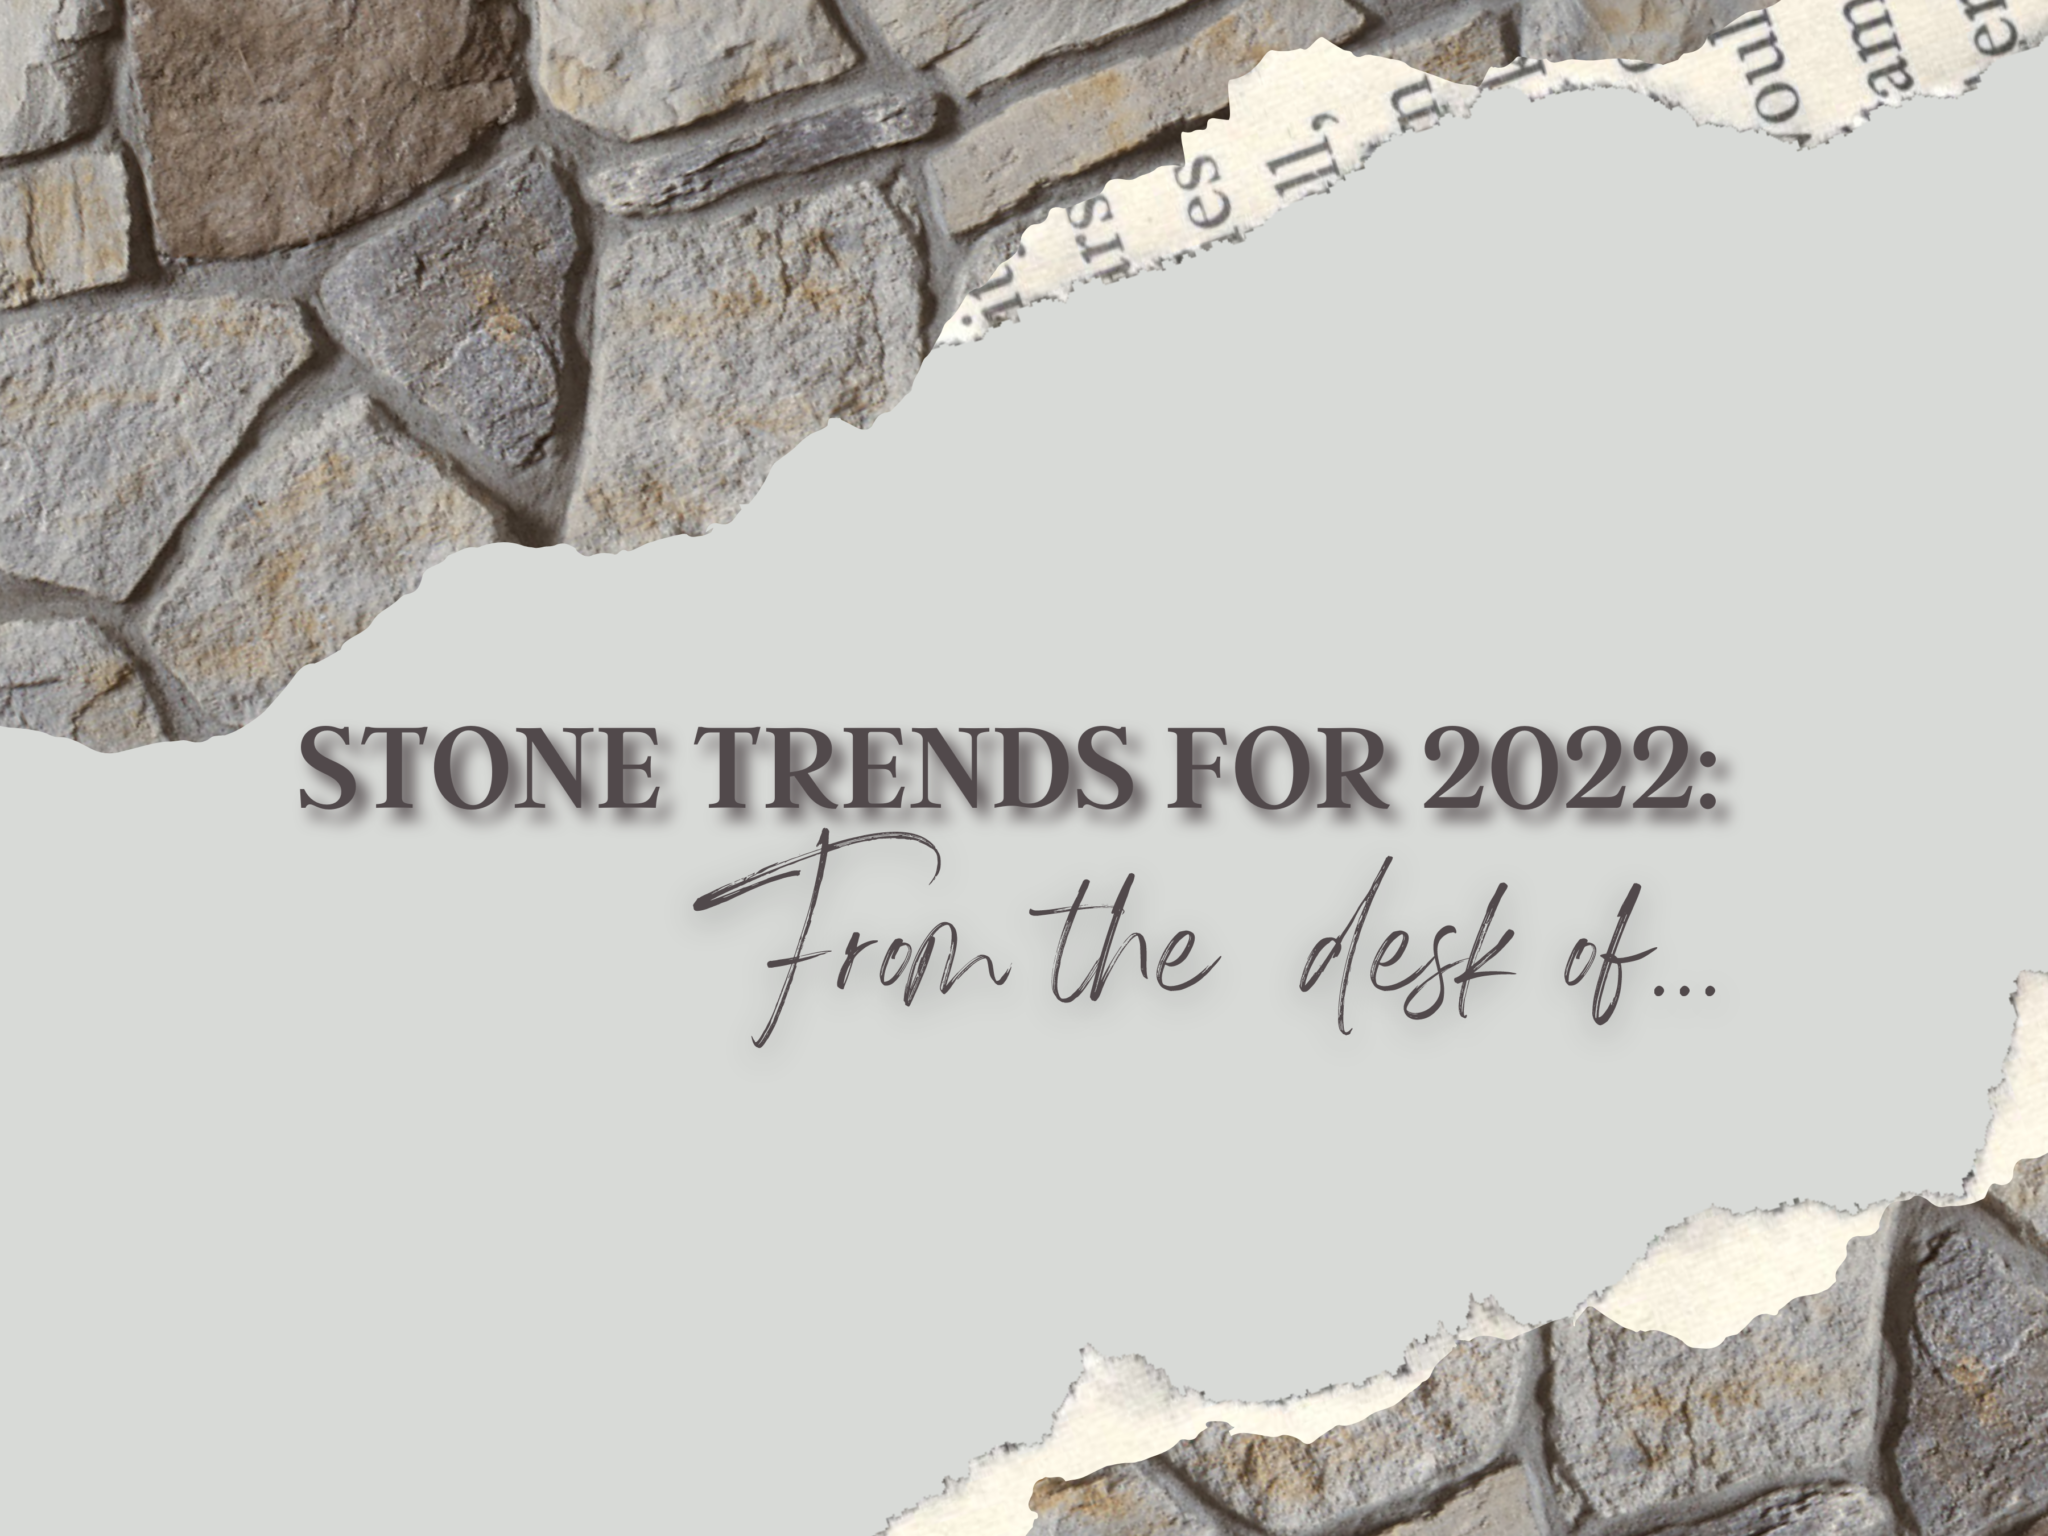 Stone Trends for 2022 From the Desk of...